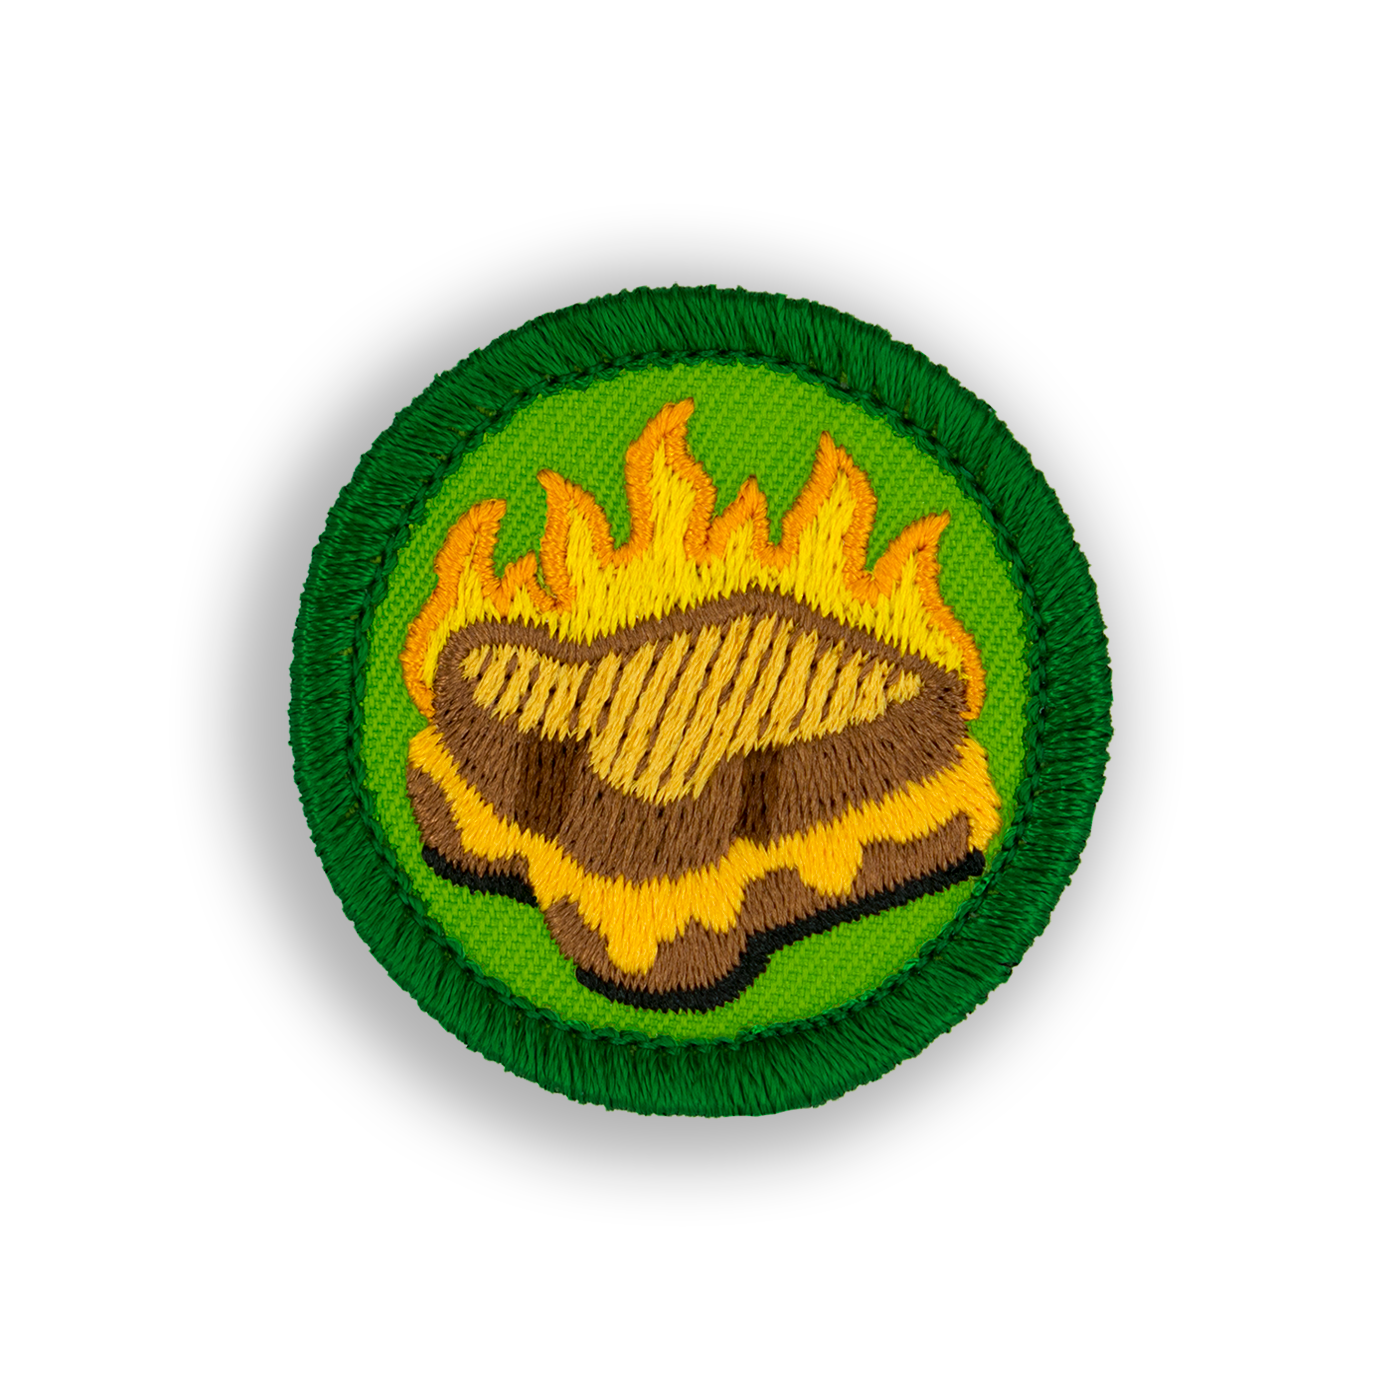 Hot Grilled Cheese Patch | Demerit Wear - Fake Merit Badges